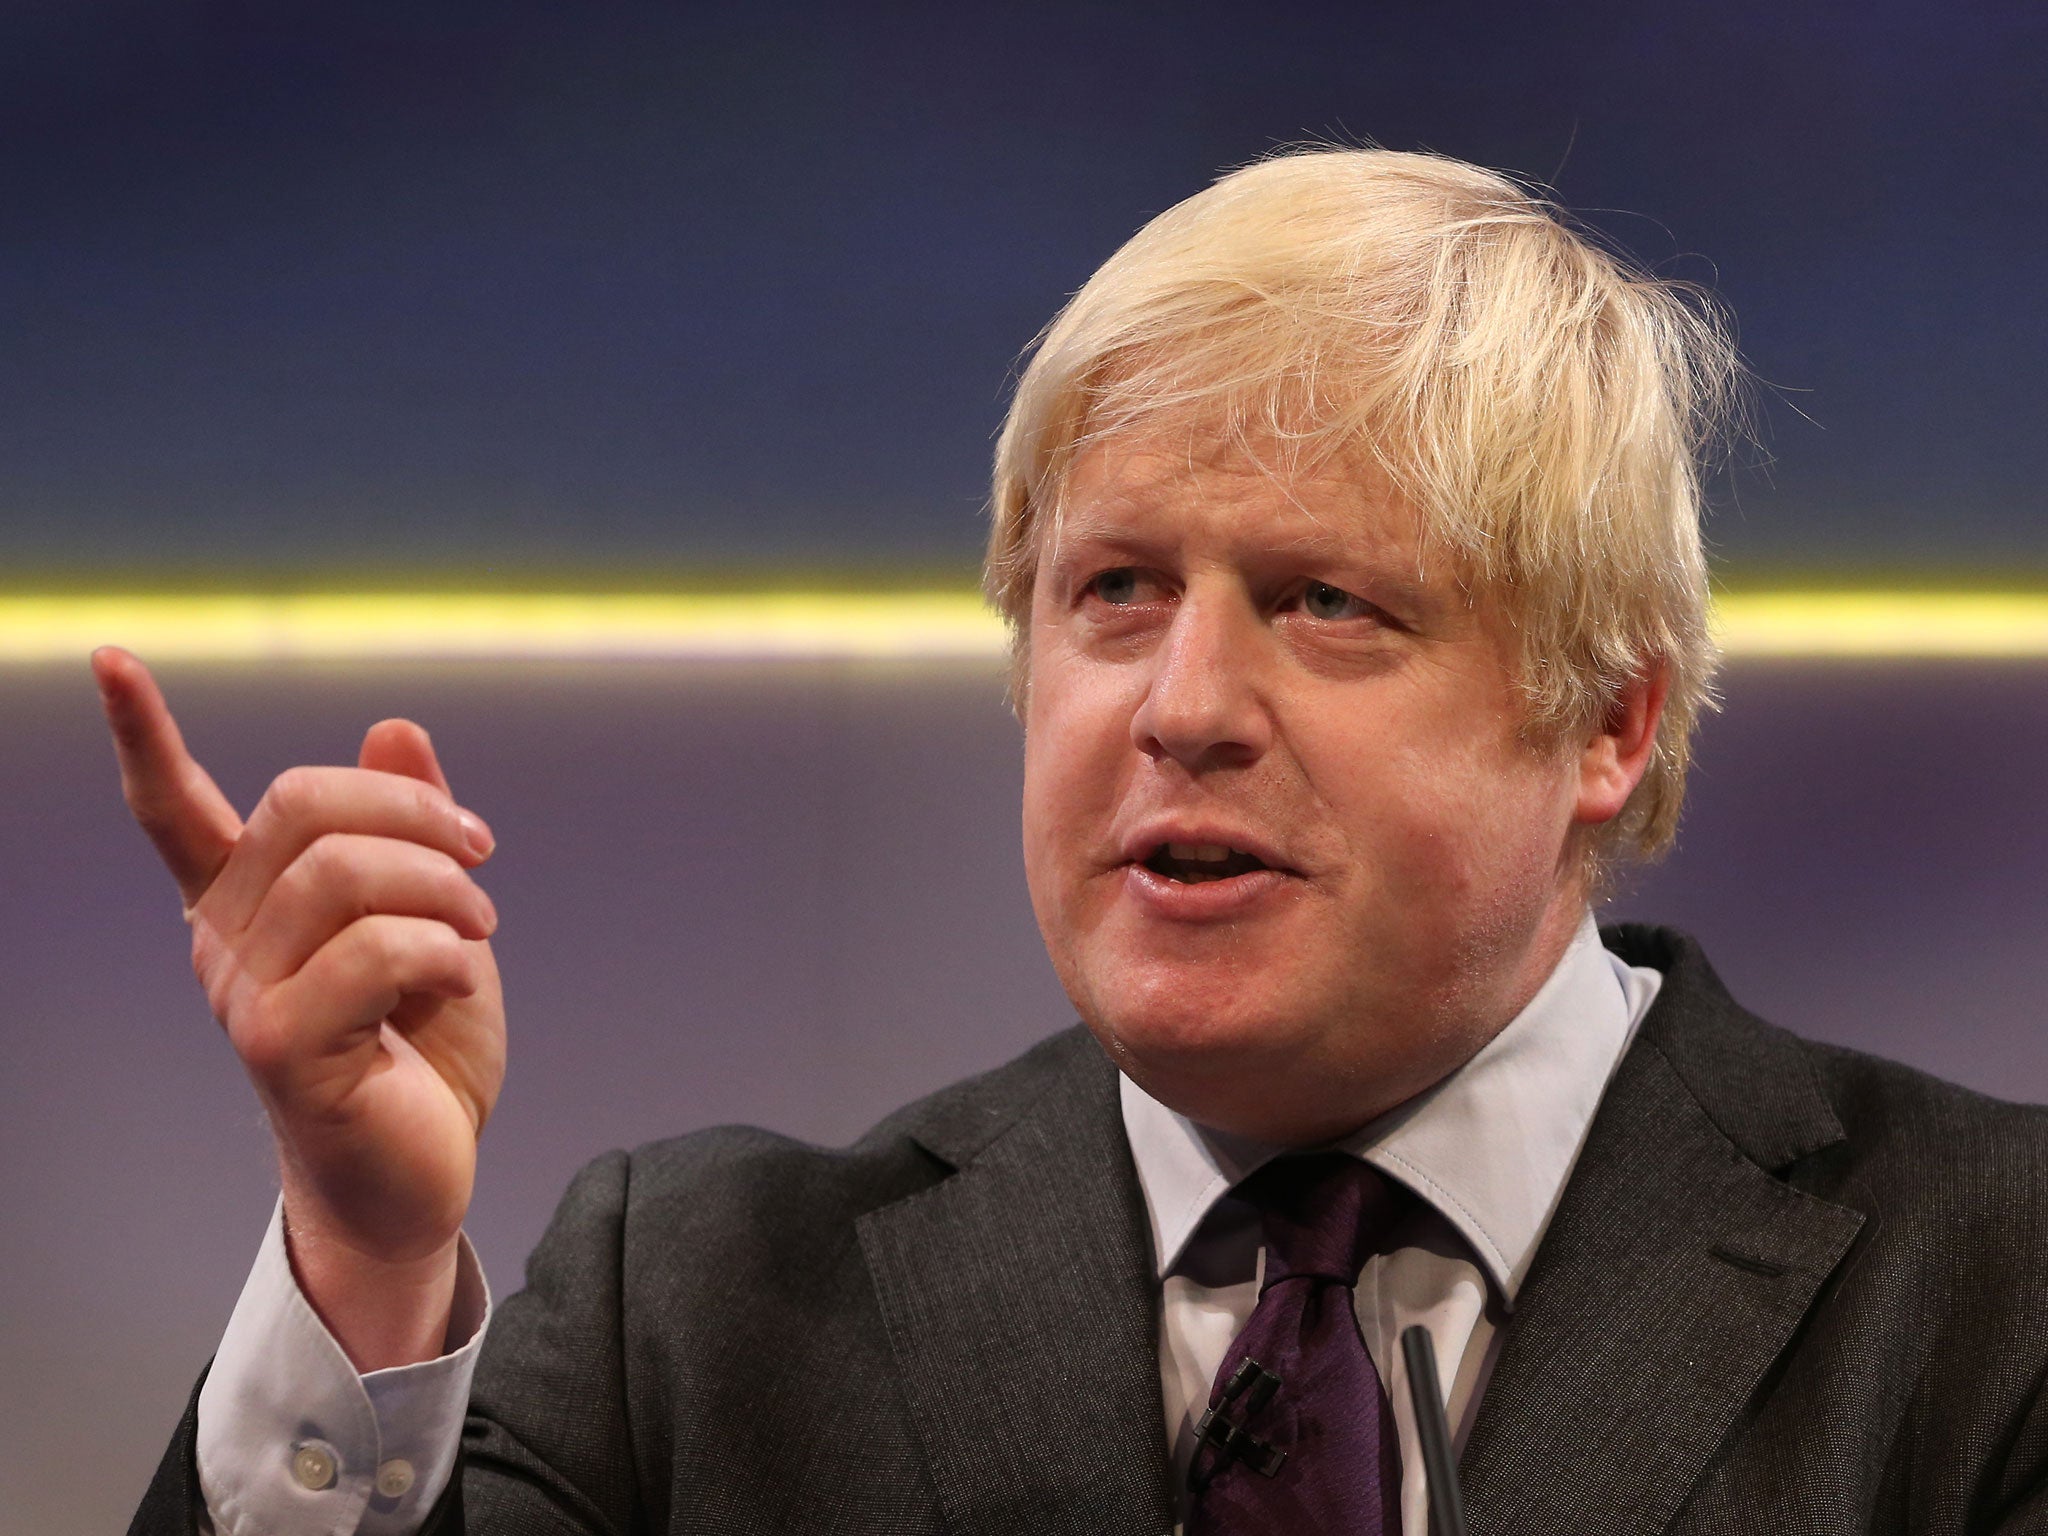 London Mayor Boris Johnson speaks at the Confederation of British Industry's (CBI) annual conference on November 19, 2012 in London, England. The United Kingdom's business leaders have gathered at The Grosvenor House Hotel for their yearly one day conference.